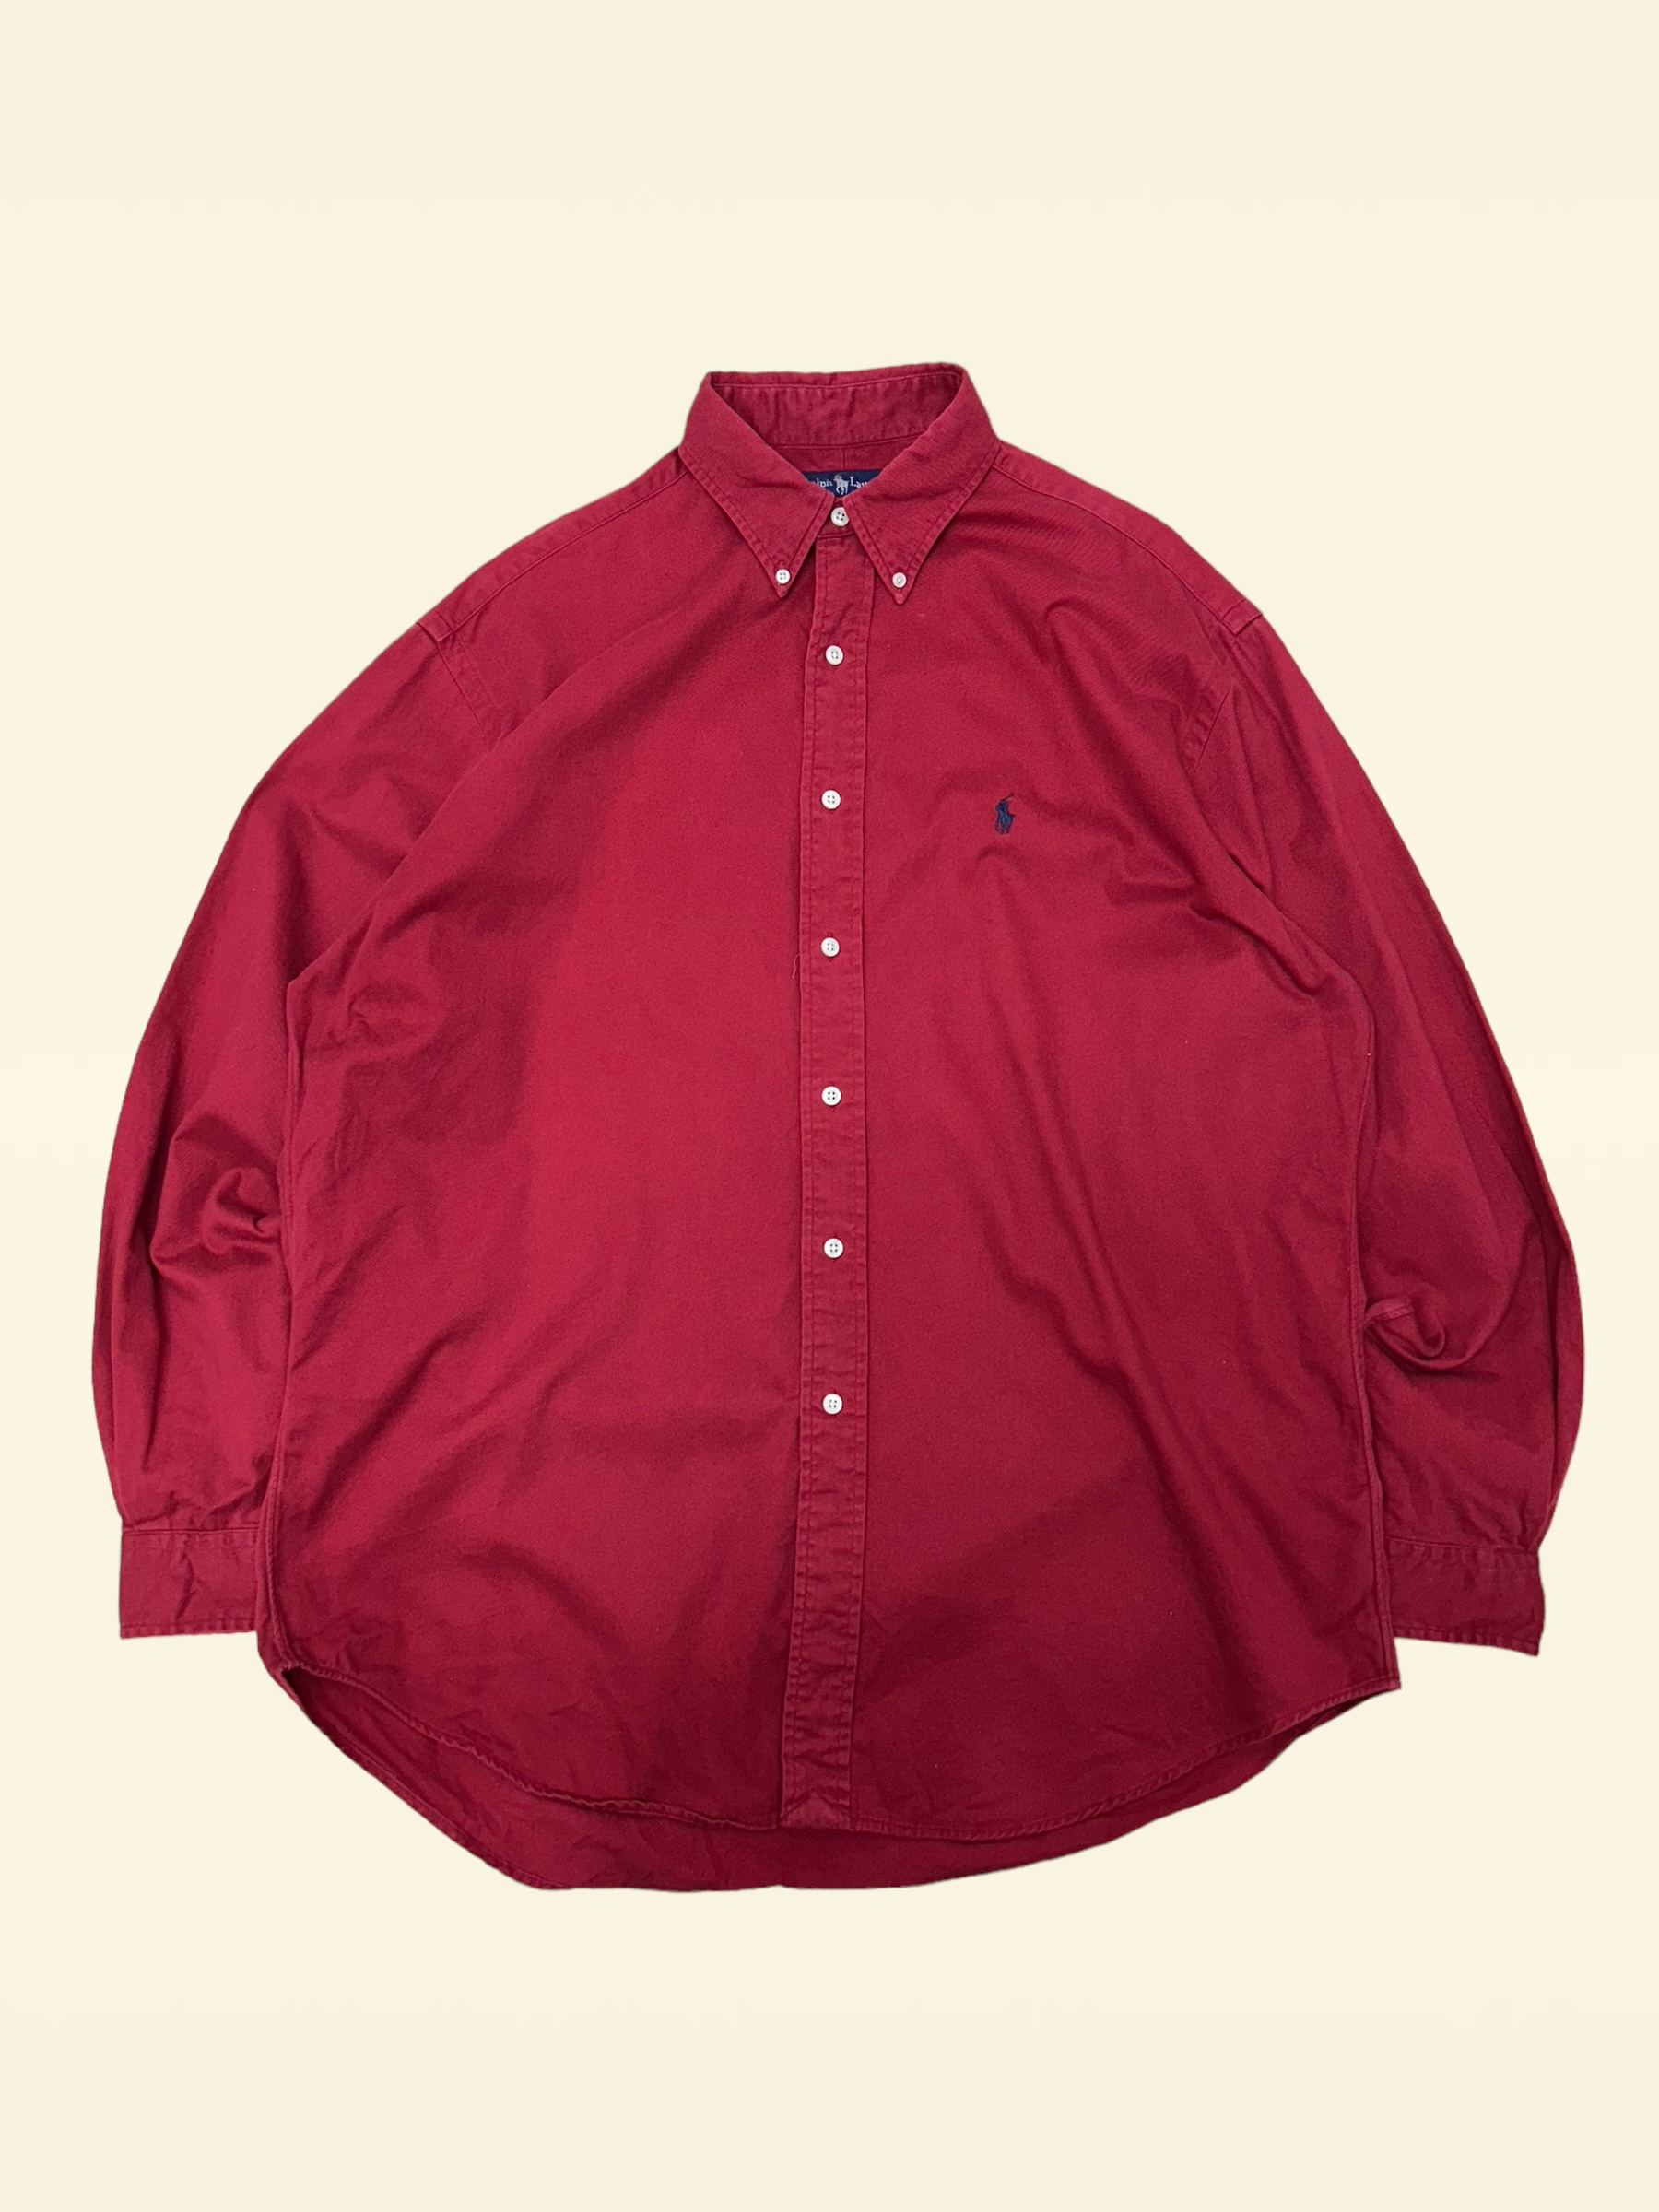 (From USA)Polo ralph lauren red solid shirt L